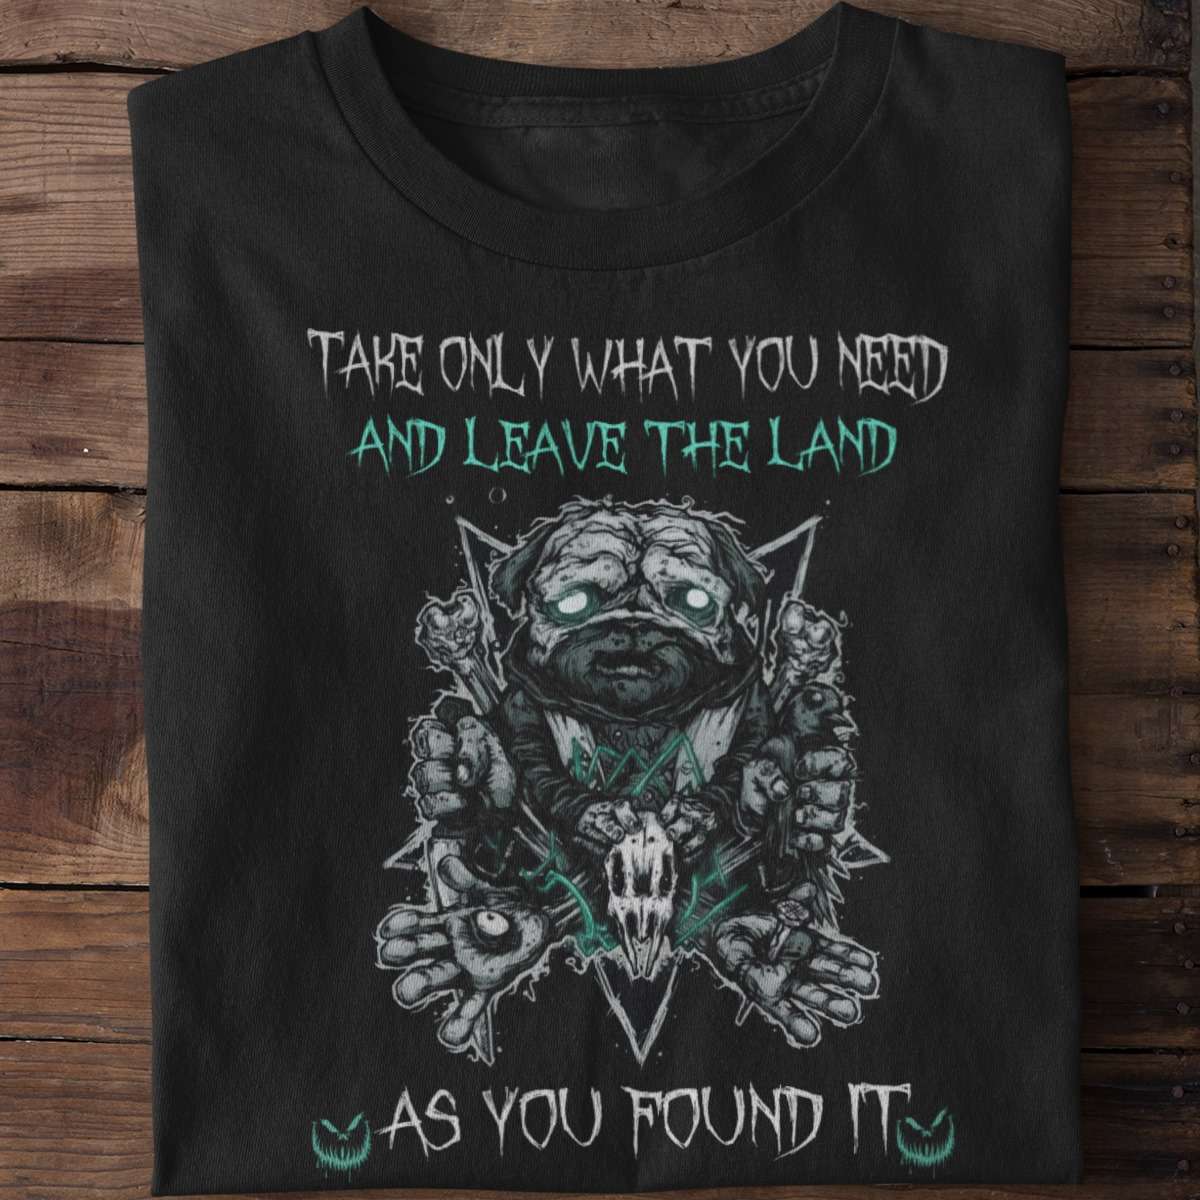 Take only what you need and leave the land as you found it - Cursed scary dog